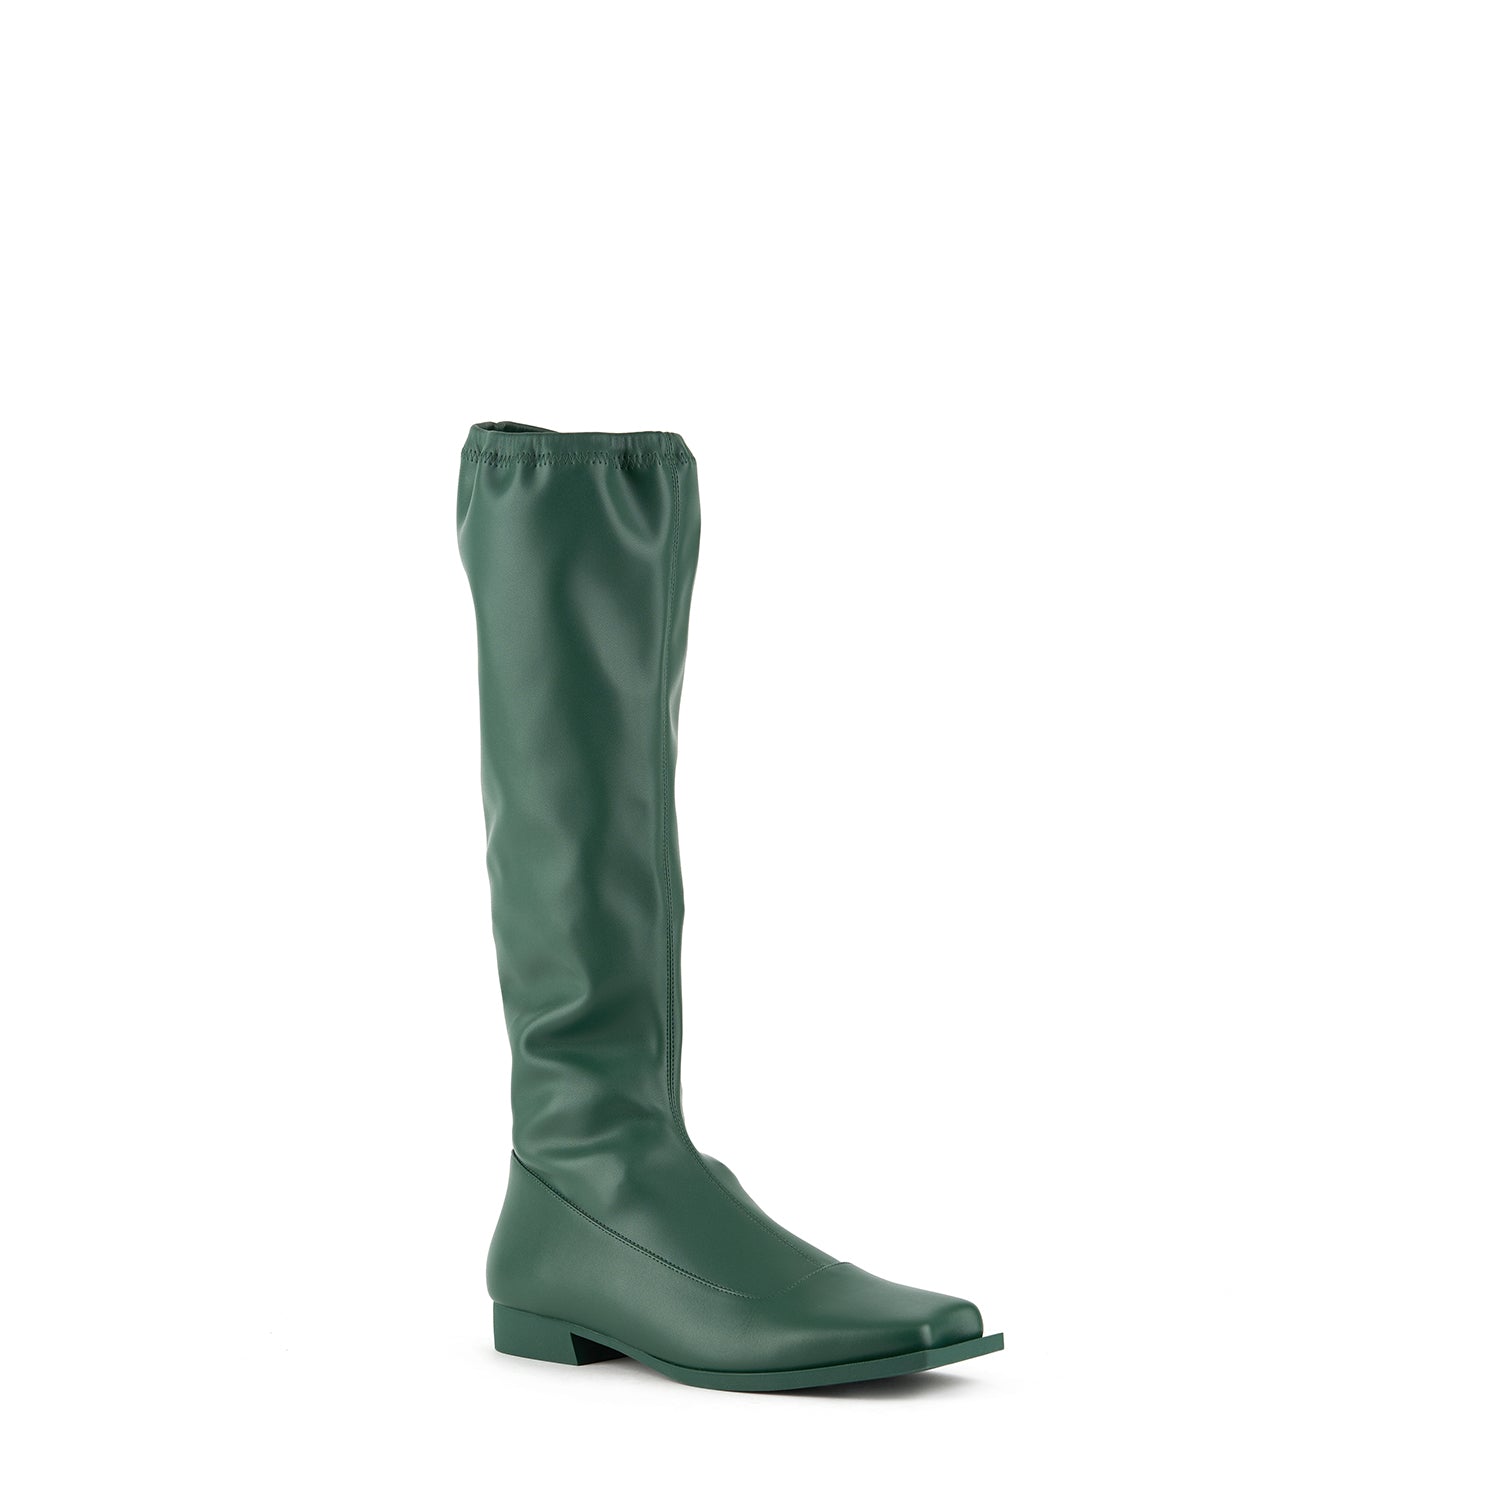 If anybody in California needs a pair of Louis Vuitton rainboots